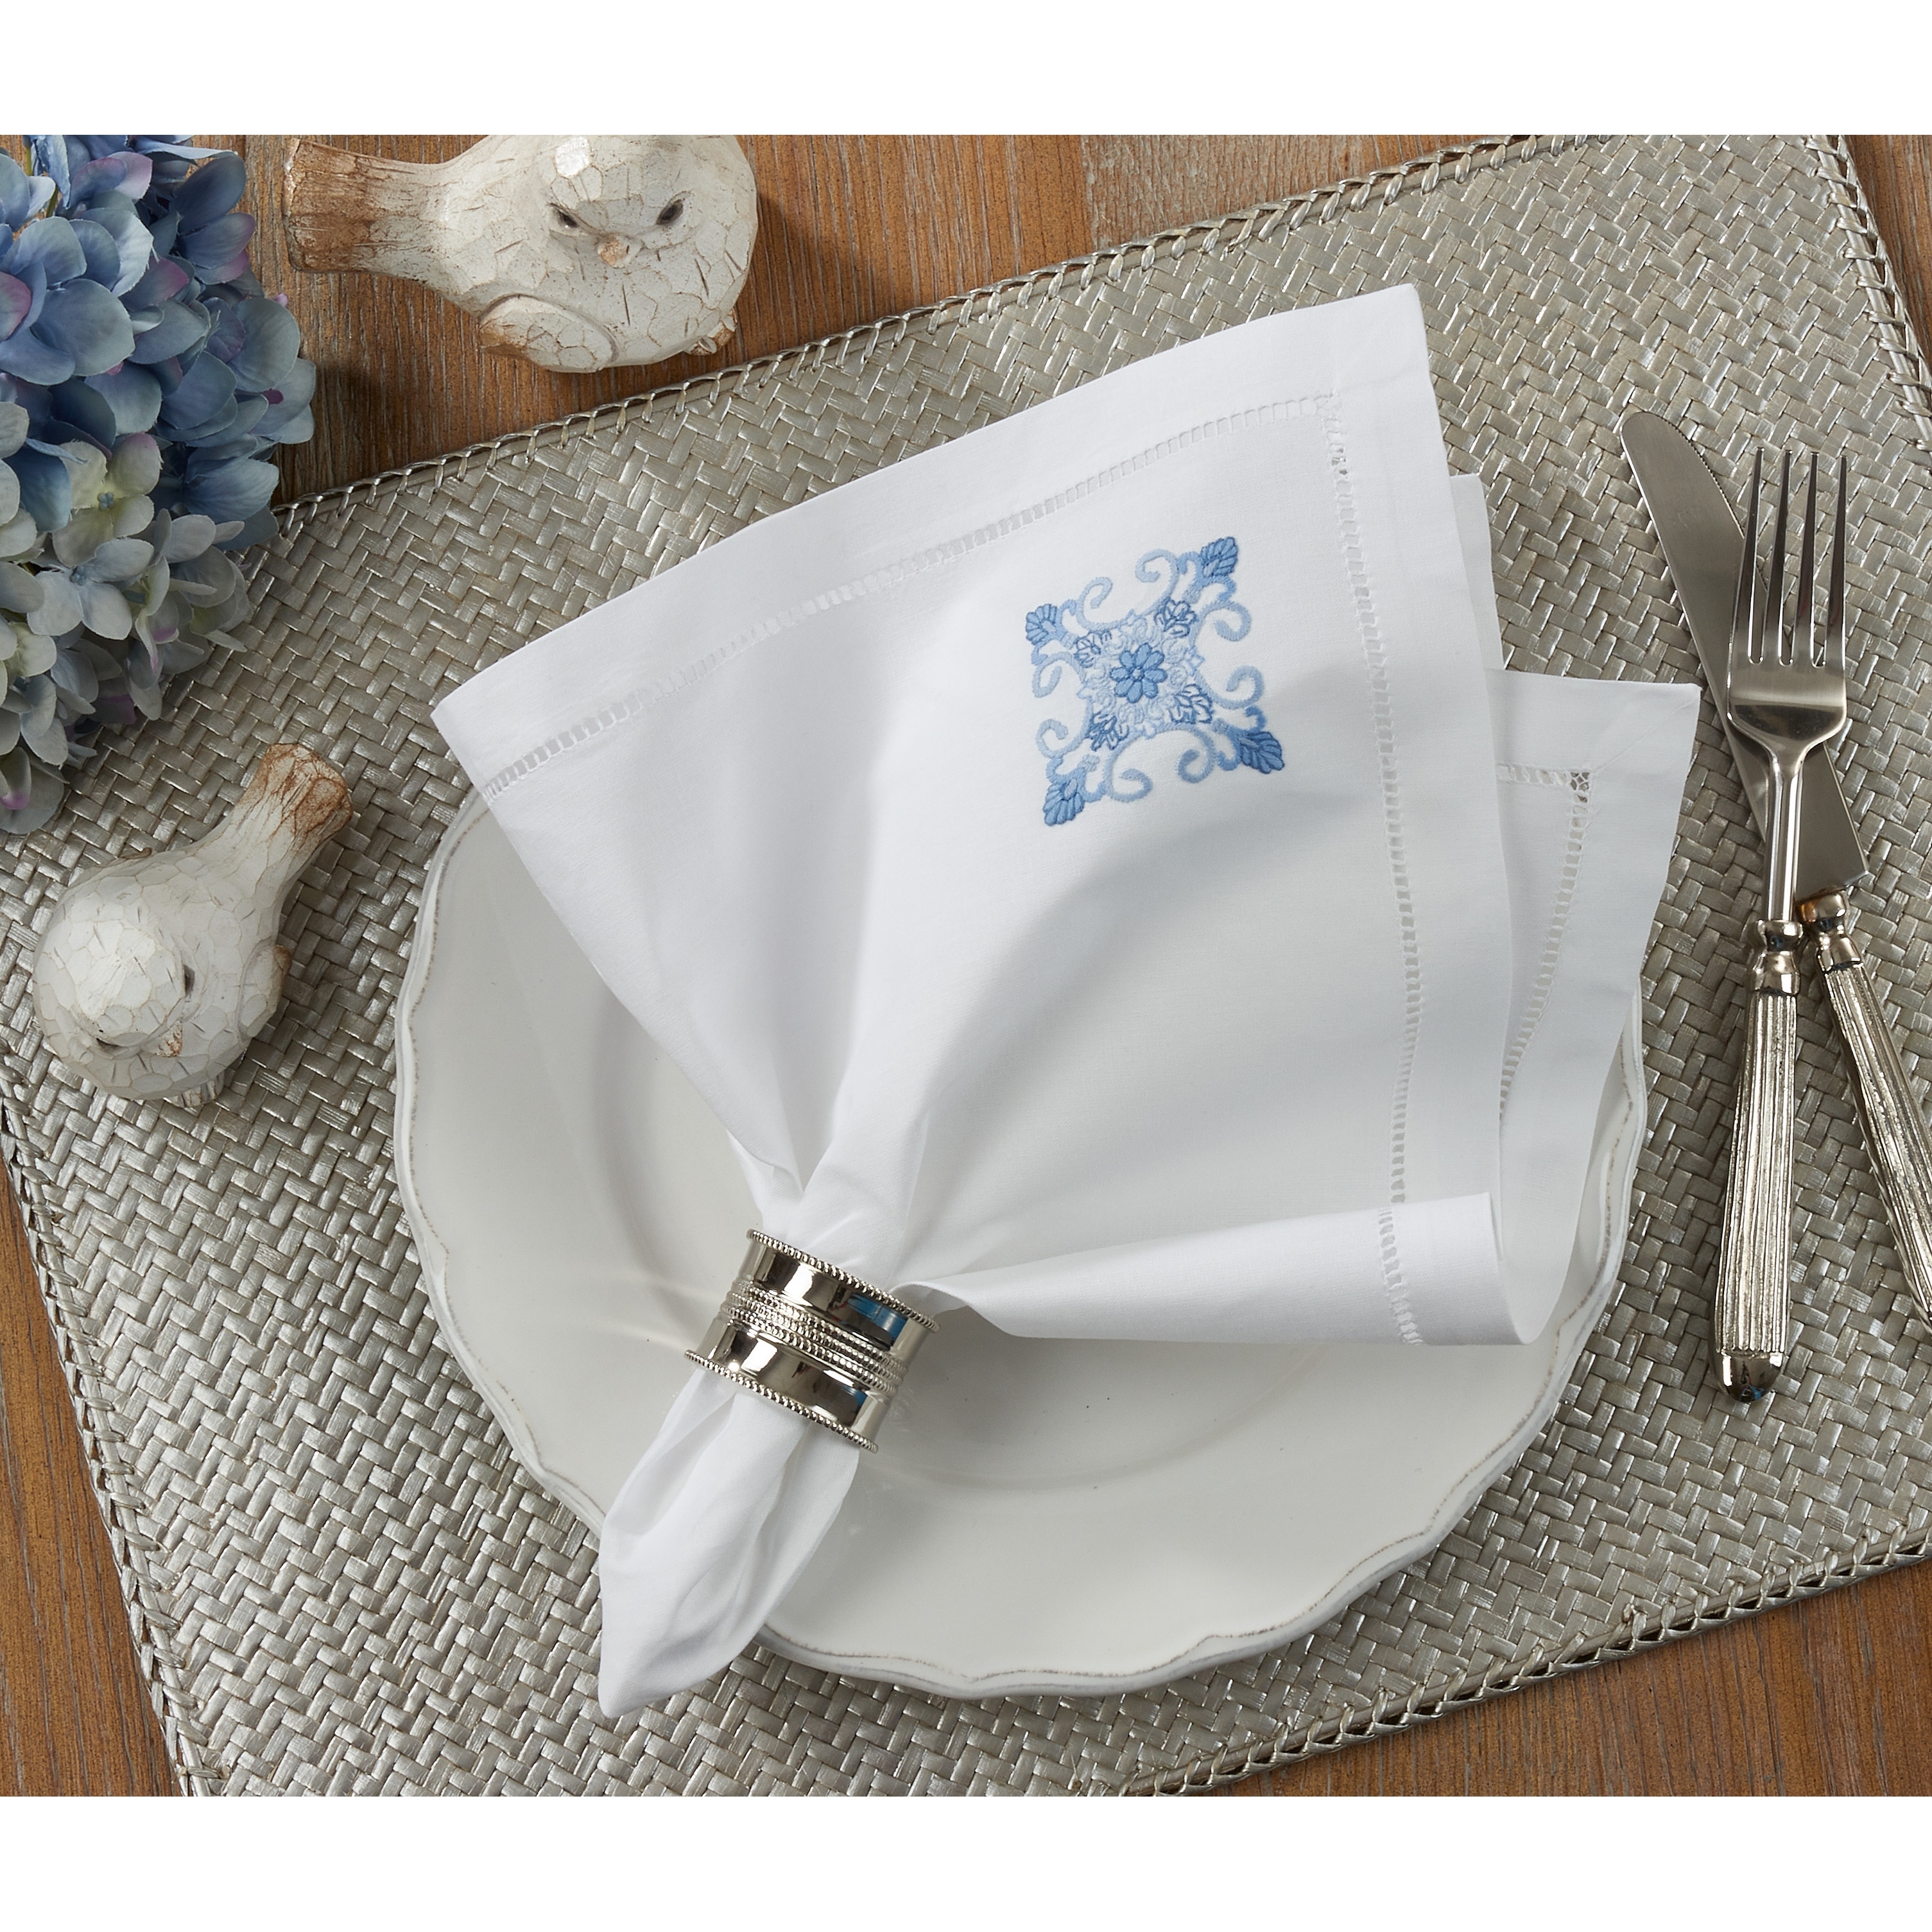 https://ak1.ostkcdn.com/images/products/is/images/direct/1079963b155ca427ad32a64cd463cefd80d62b5a/Embroidered-Blue-Medallion-Hemstitched-Cotton-Napkin-%28Set-of-6%29.jpg